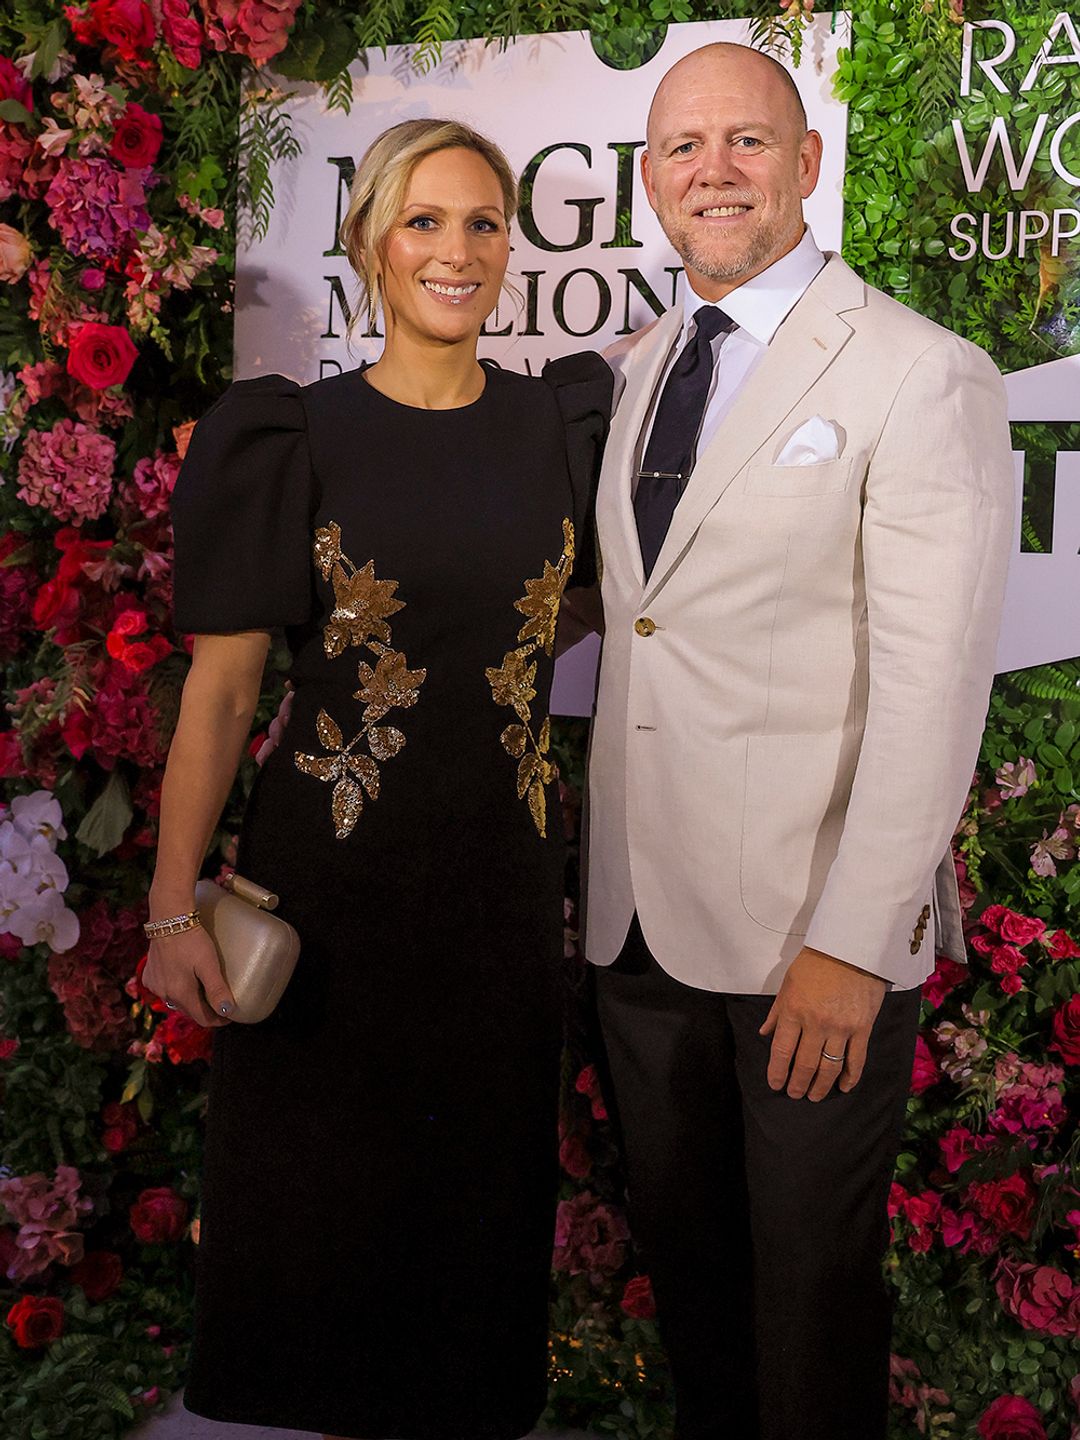 Zara and Mike Tindall at the Magic Millions Racing Women Achievement Awards 